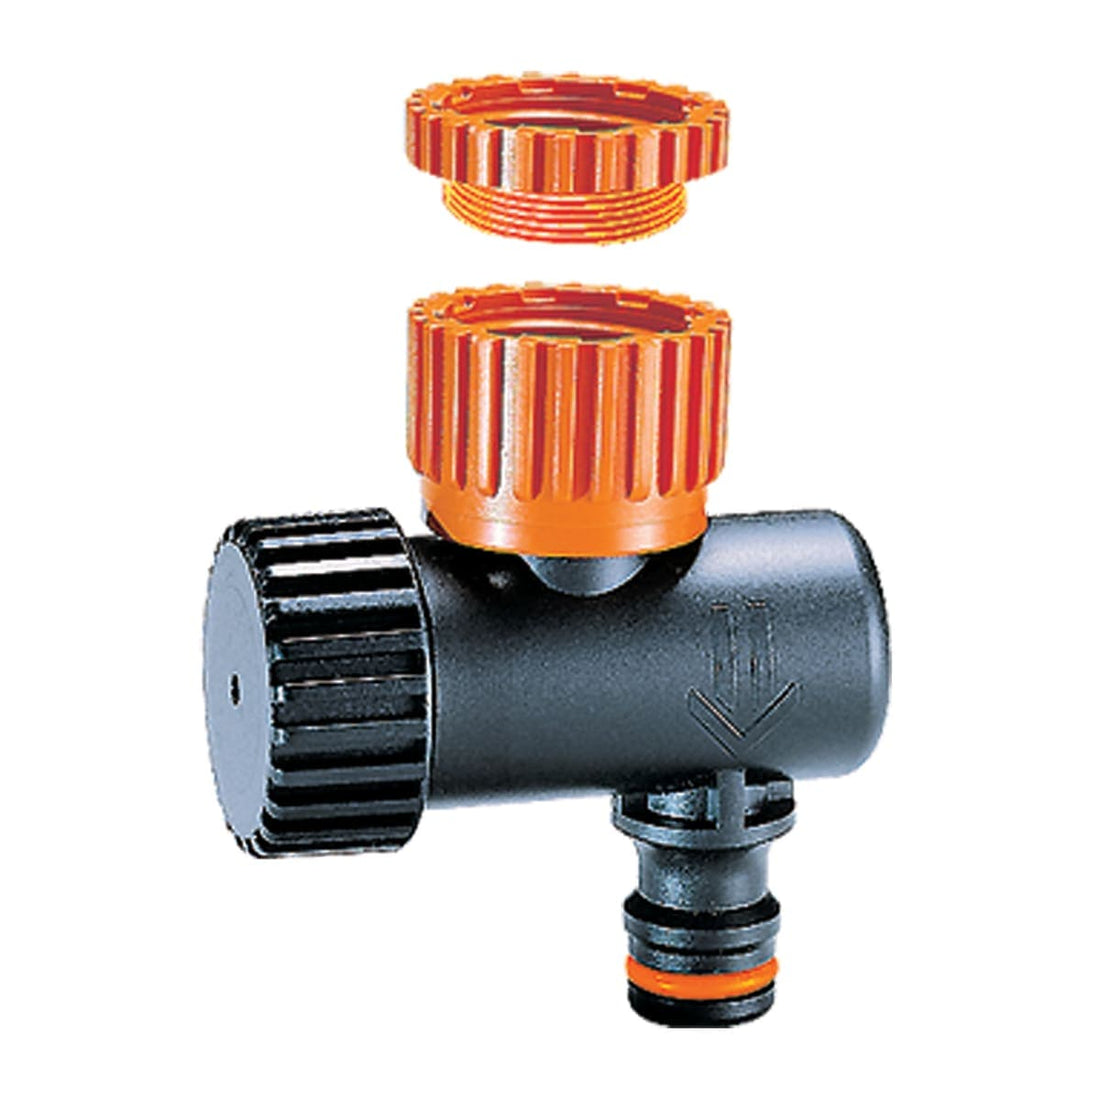 PRESSURE STABILISER WITH CLABER TAP CONNECTION - best price from Maltashopper.com BR500444310